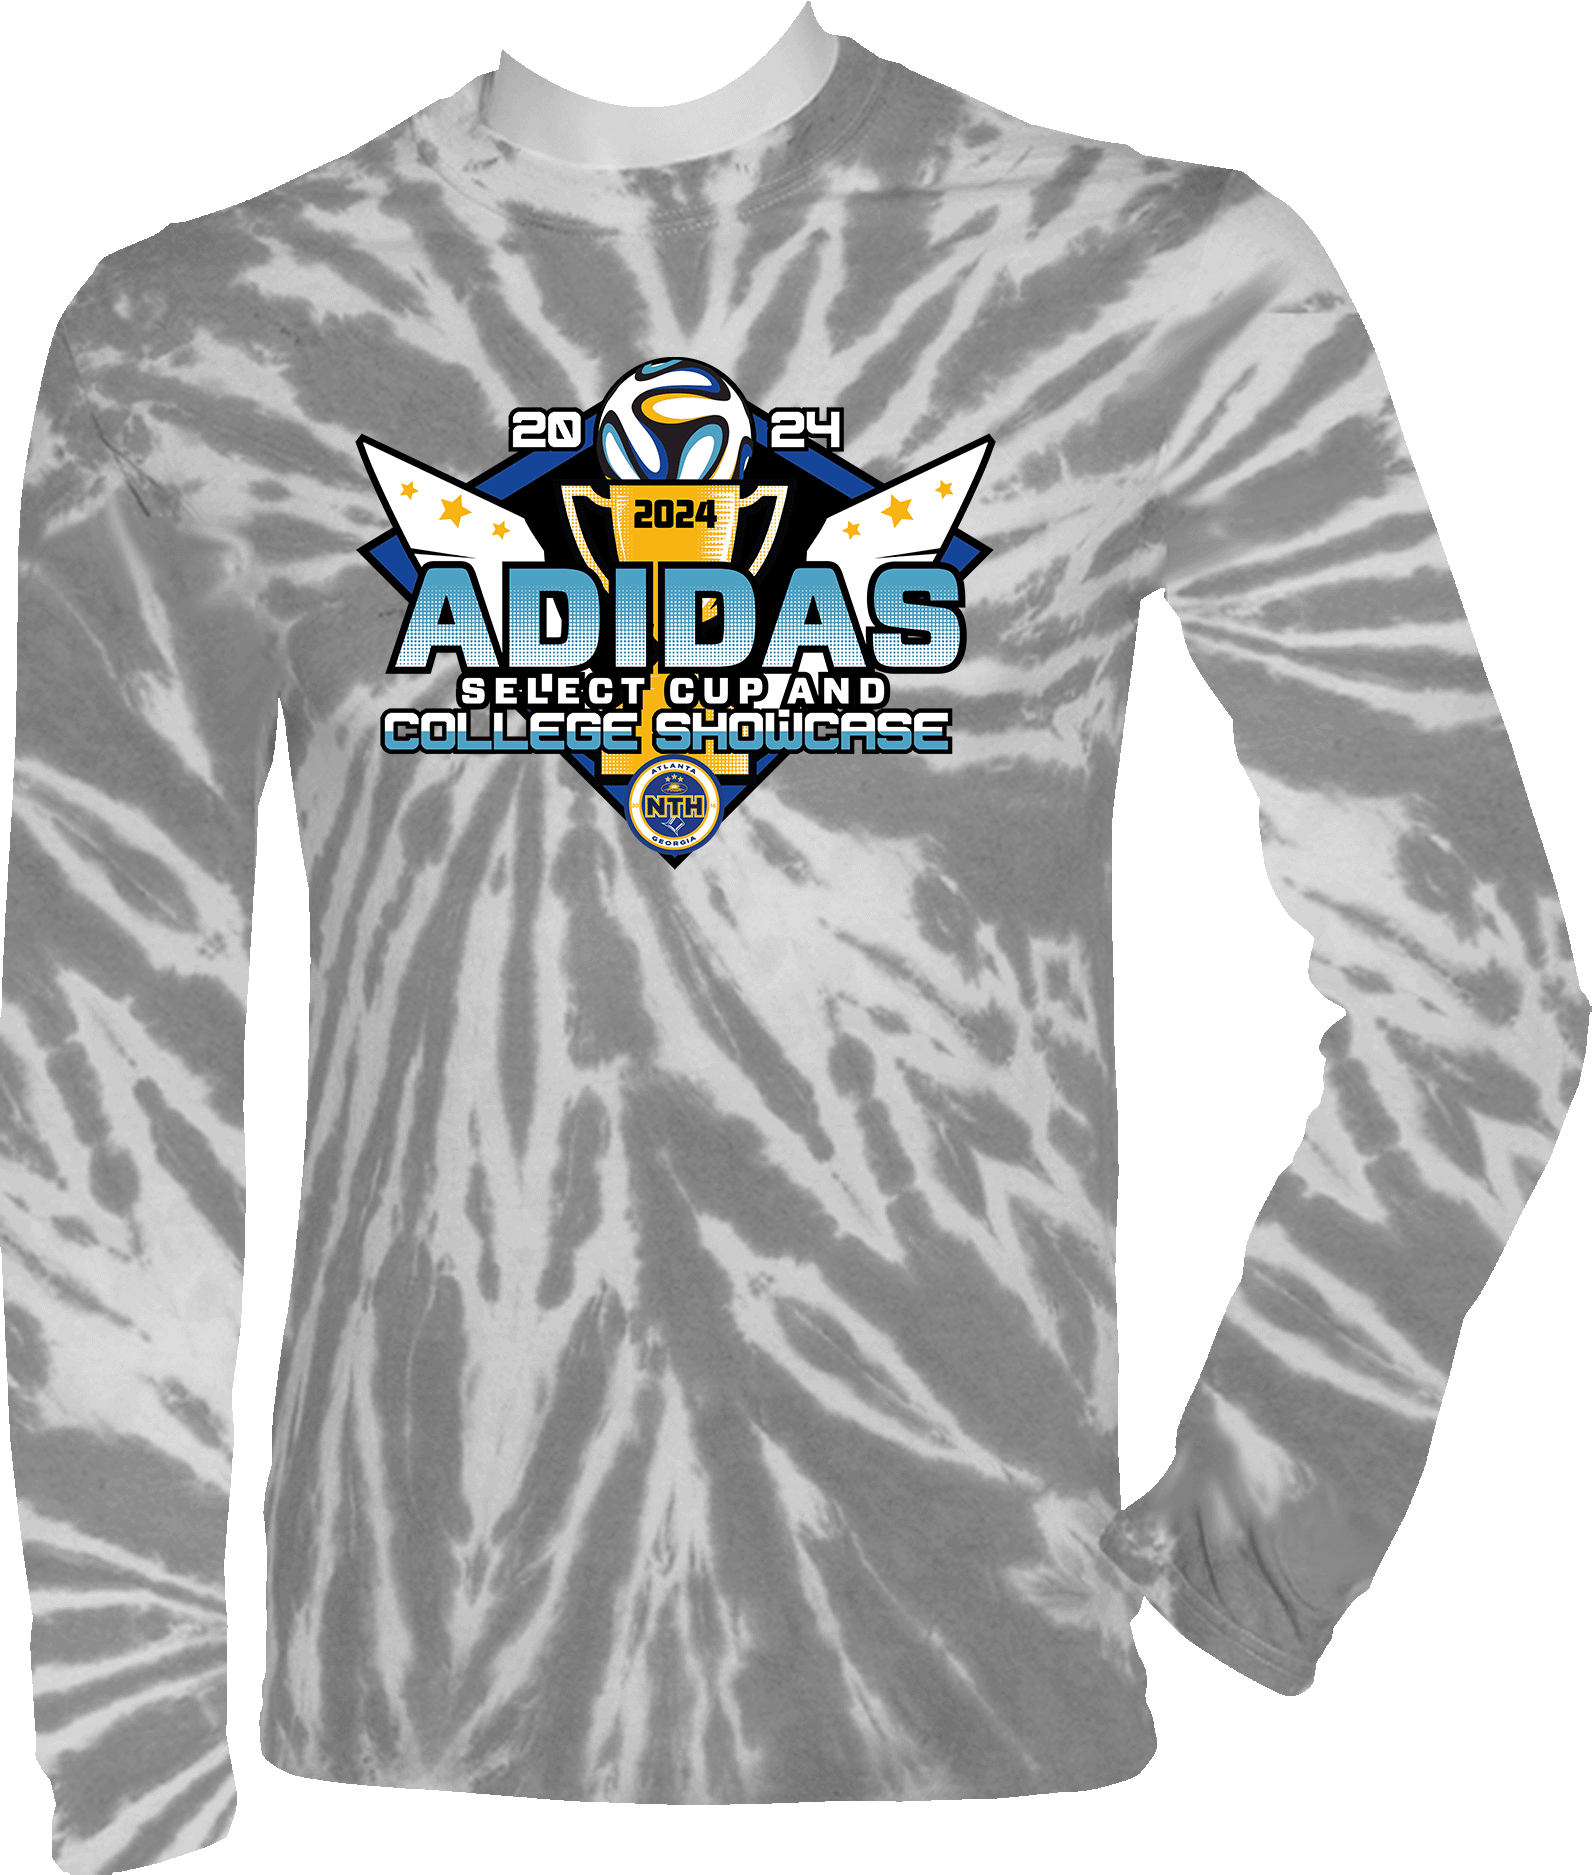 Tie-Dye Long Sleeves - 2024 NTH Adidas Select Cup and College Showcase